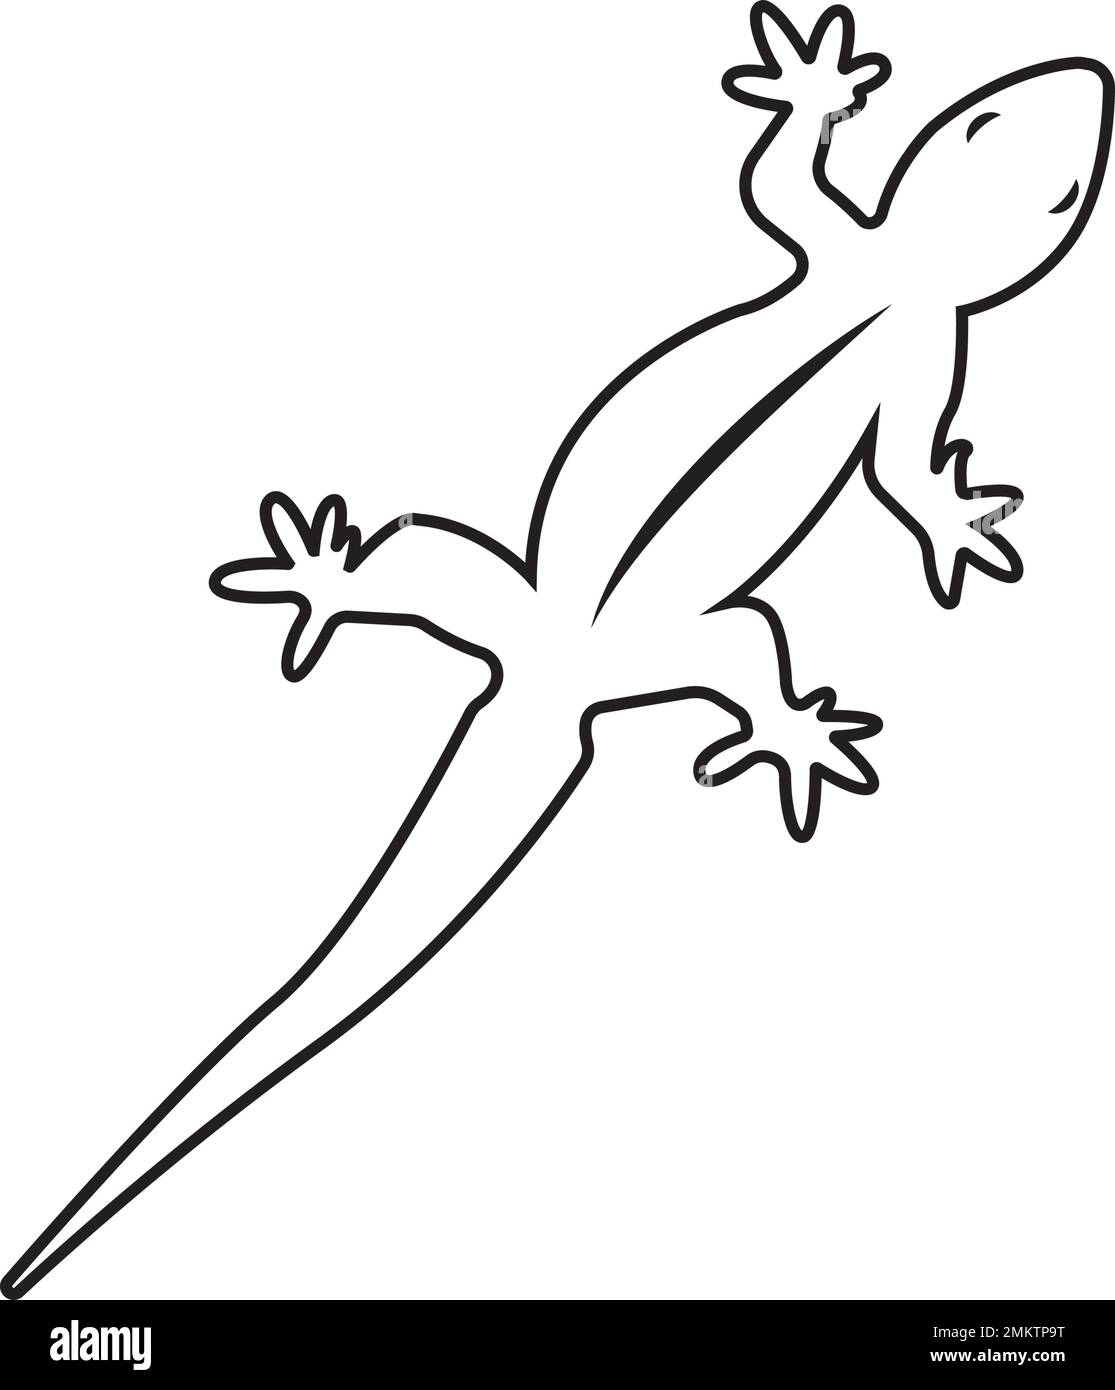 How to draw a Lizard 🦎 easy step by step / Lizard drawing easy - YouTube